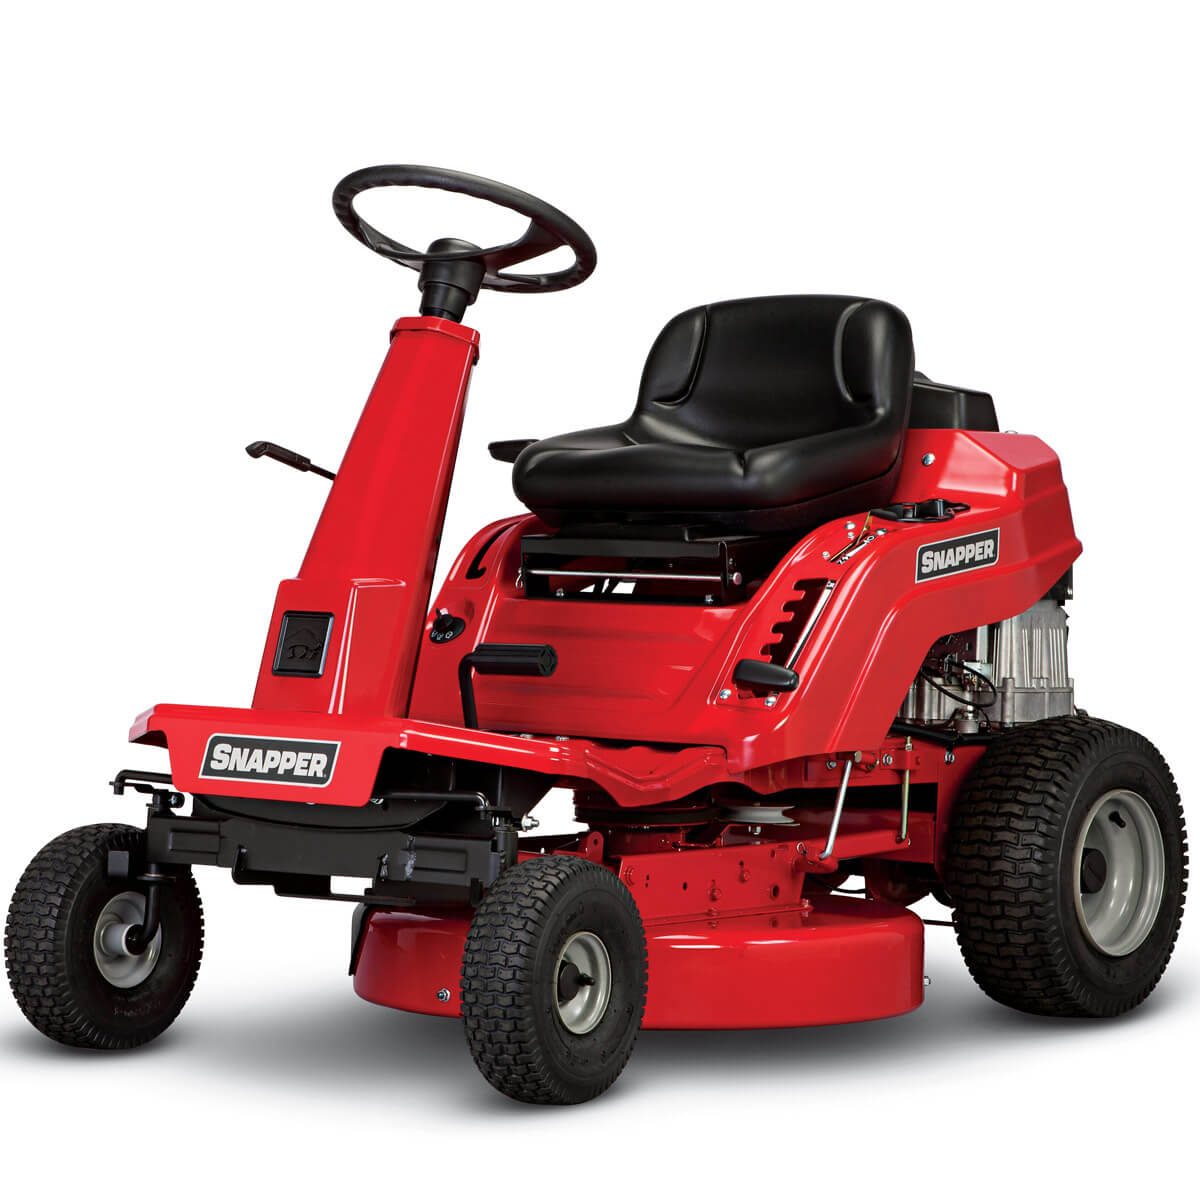 Is it Time to Upgrade to a Riding Lawn Mower?